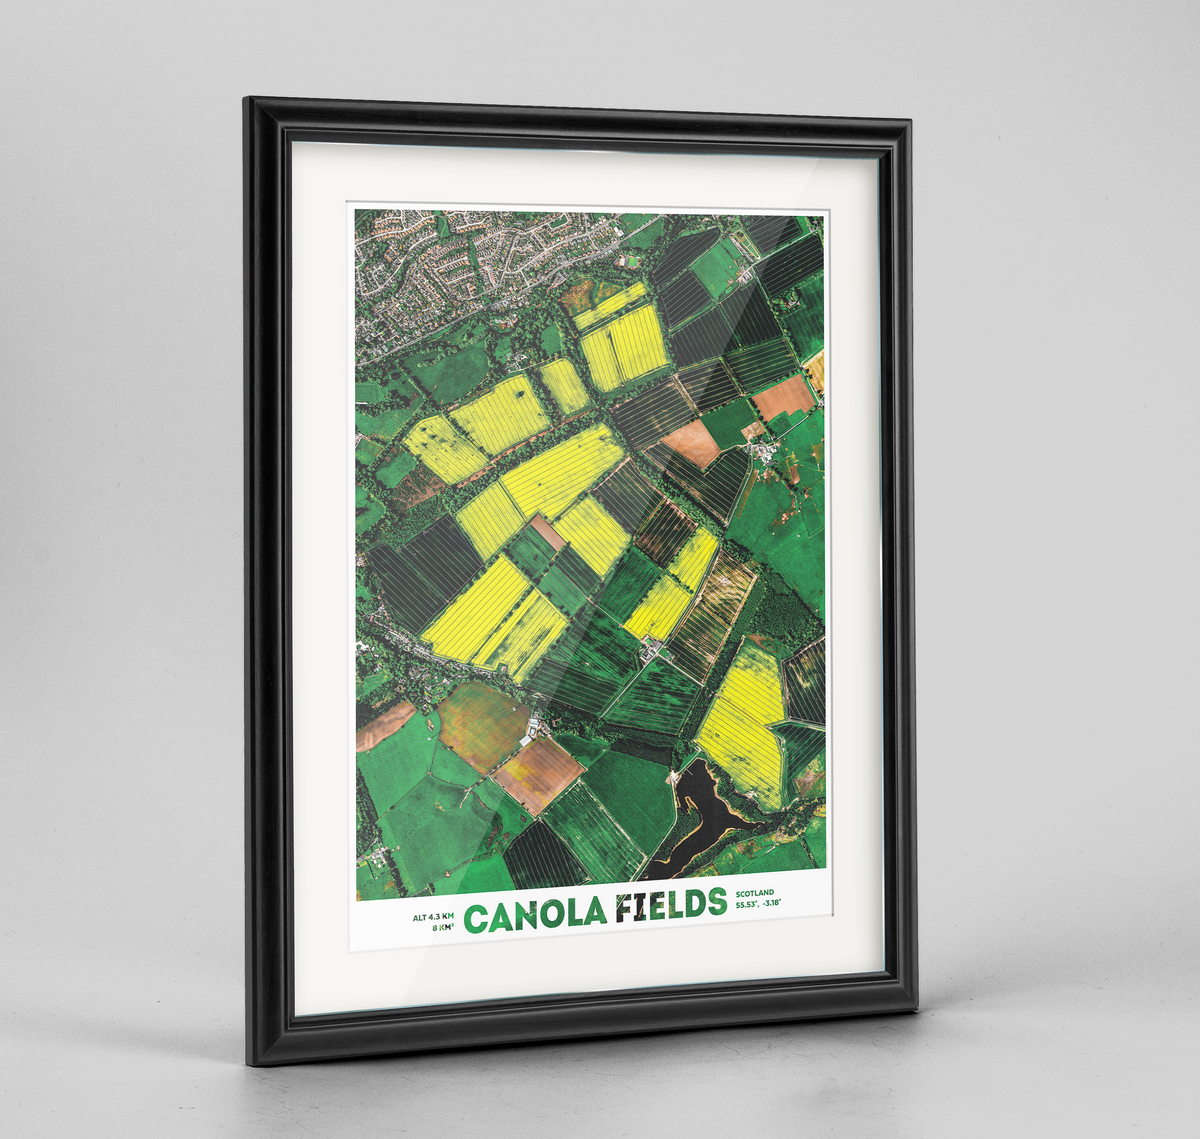 Canola Fields Earth Photography - Art Print - Point Two Design